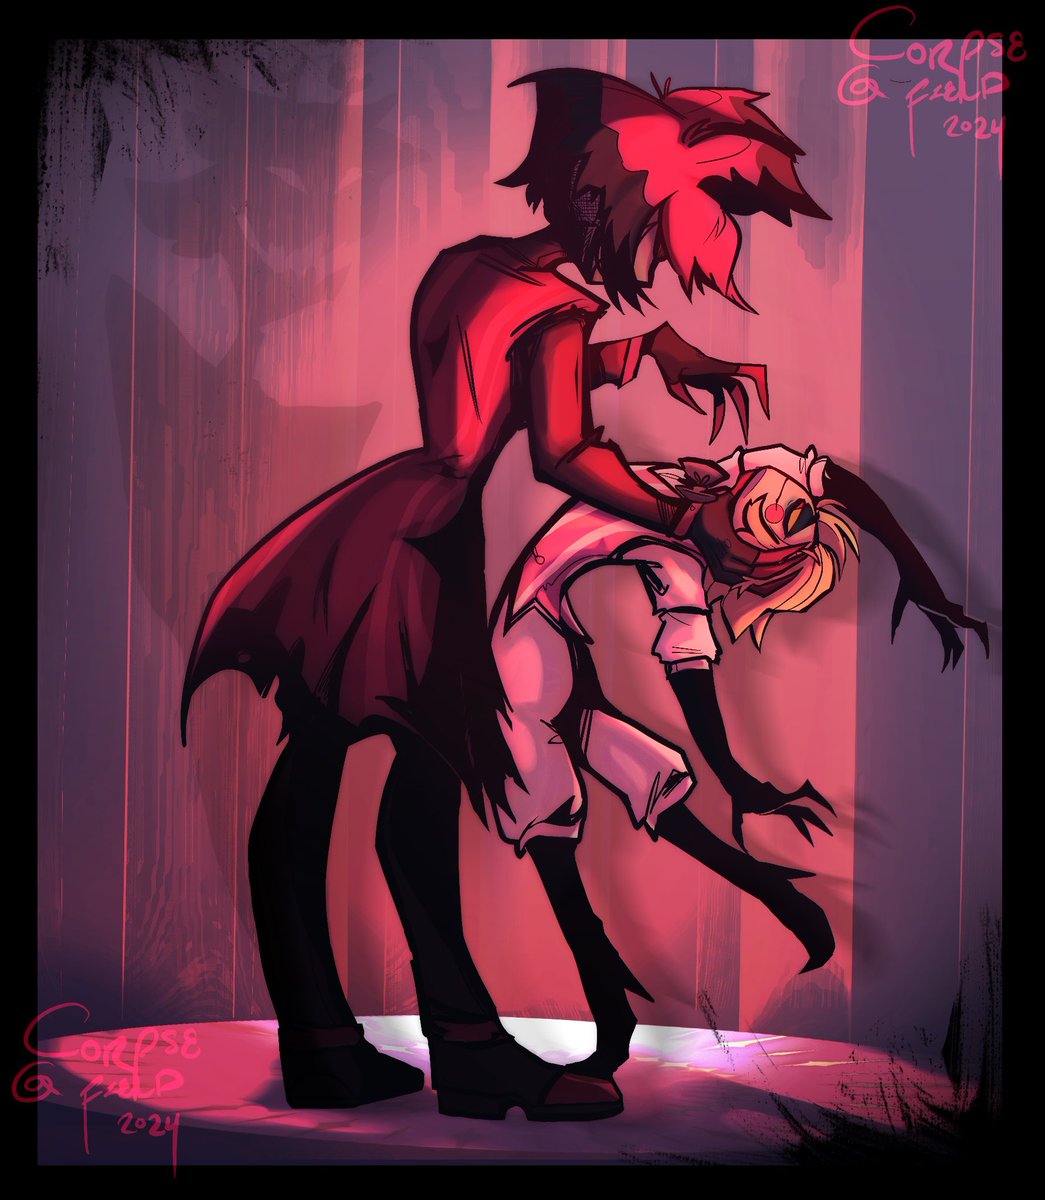 “But don't you see, my dear? I am your Doppelgänger.”

Stalker’s Tango on repeat. #radioapple #HazbinHotelLucifer #HazbinHotelAlastor #HazbinHotel